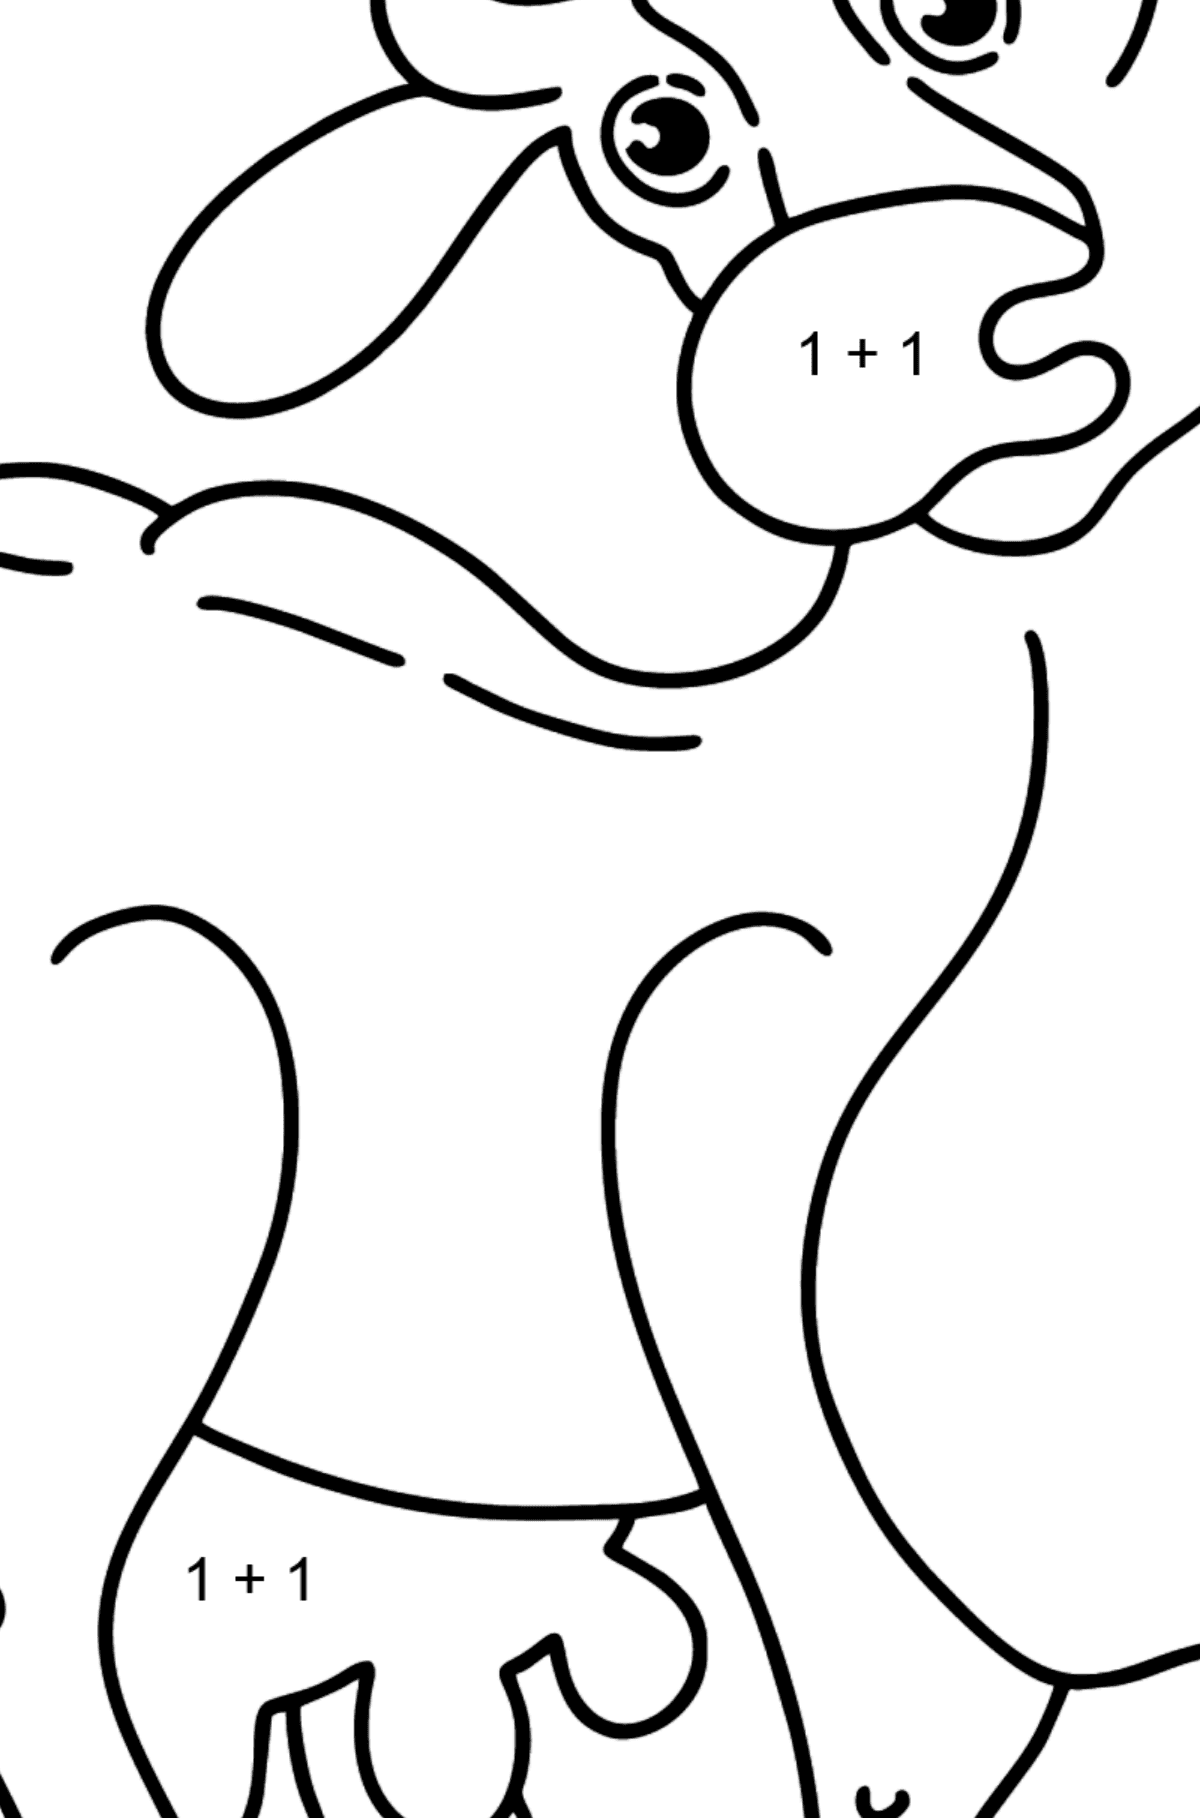 Cow coloring page - Math Coloring - Addition for Kids